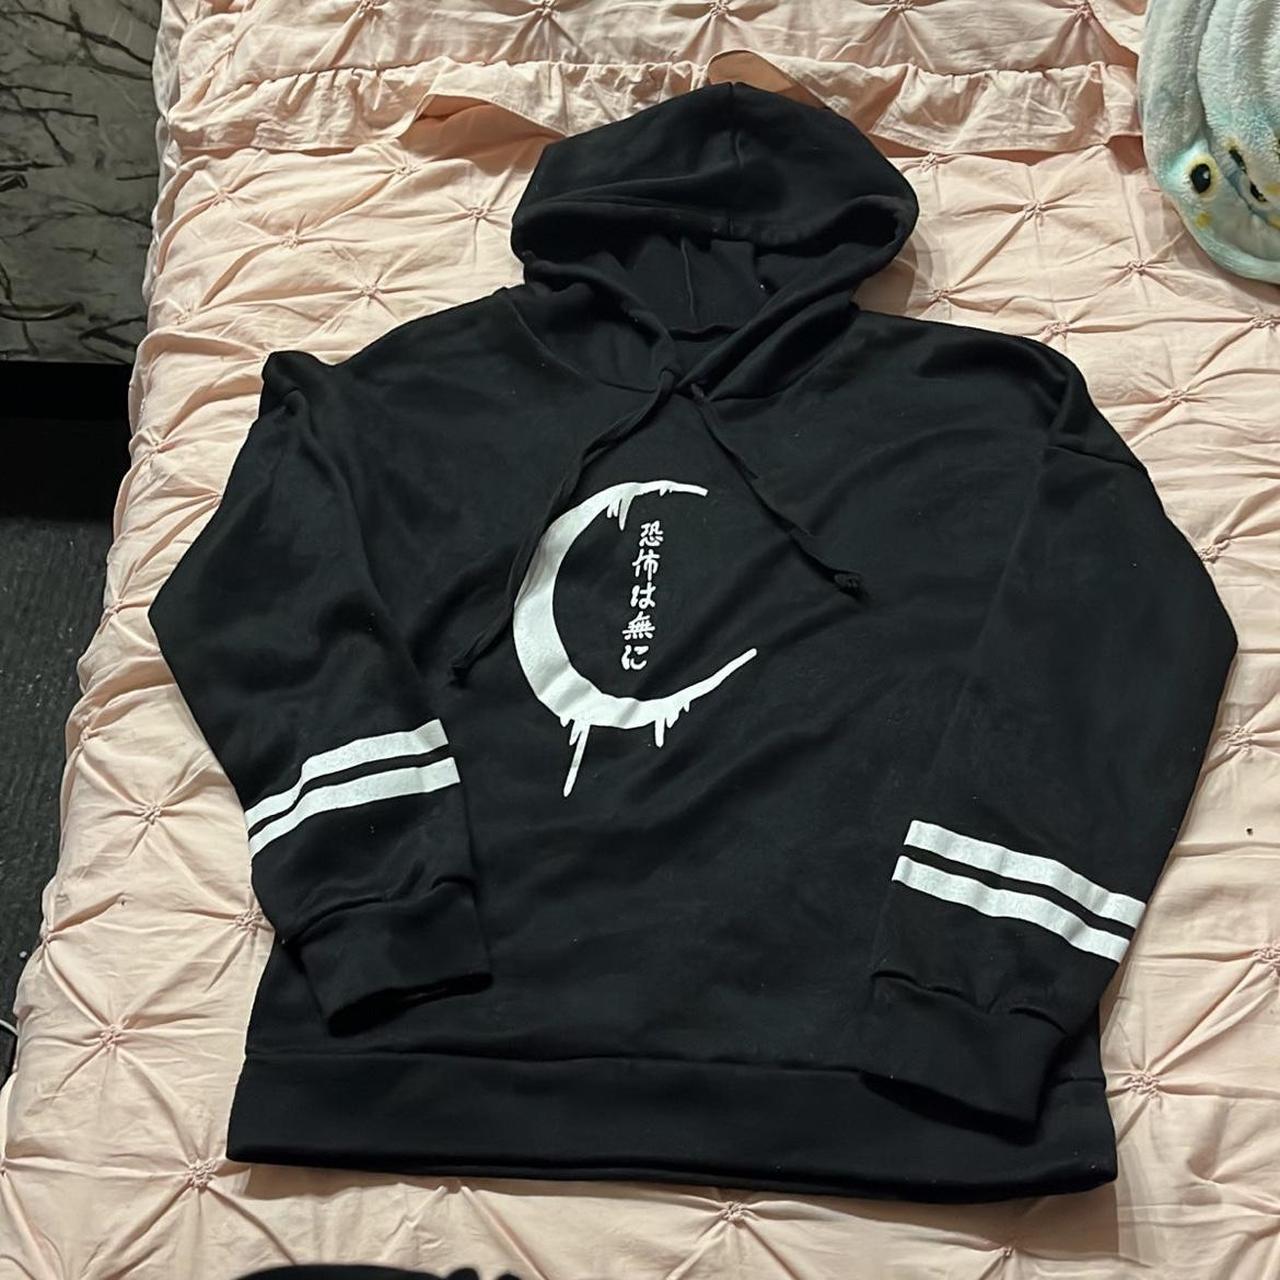 ICONIC ANIME BLACK HOODIE FROM 2017 (pls check... - Depop